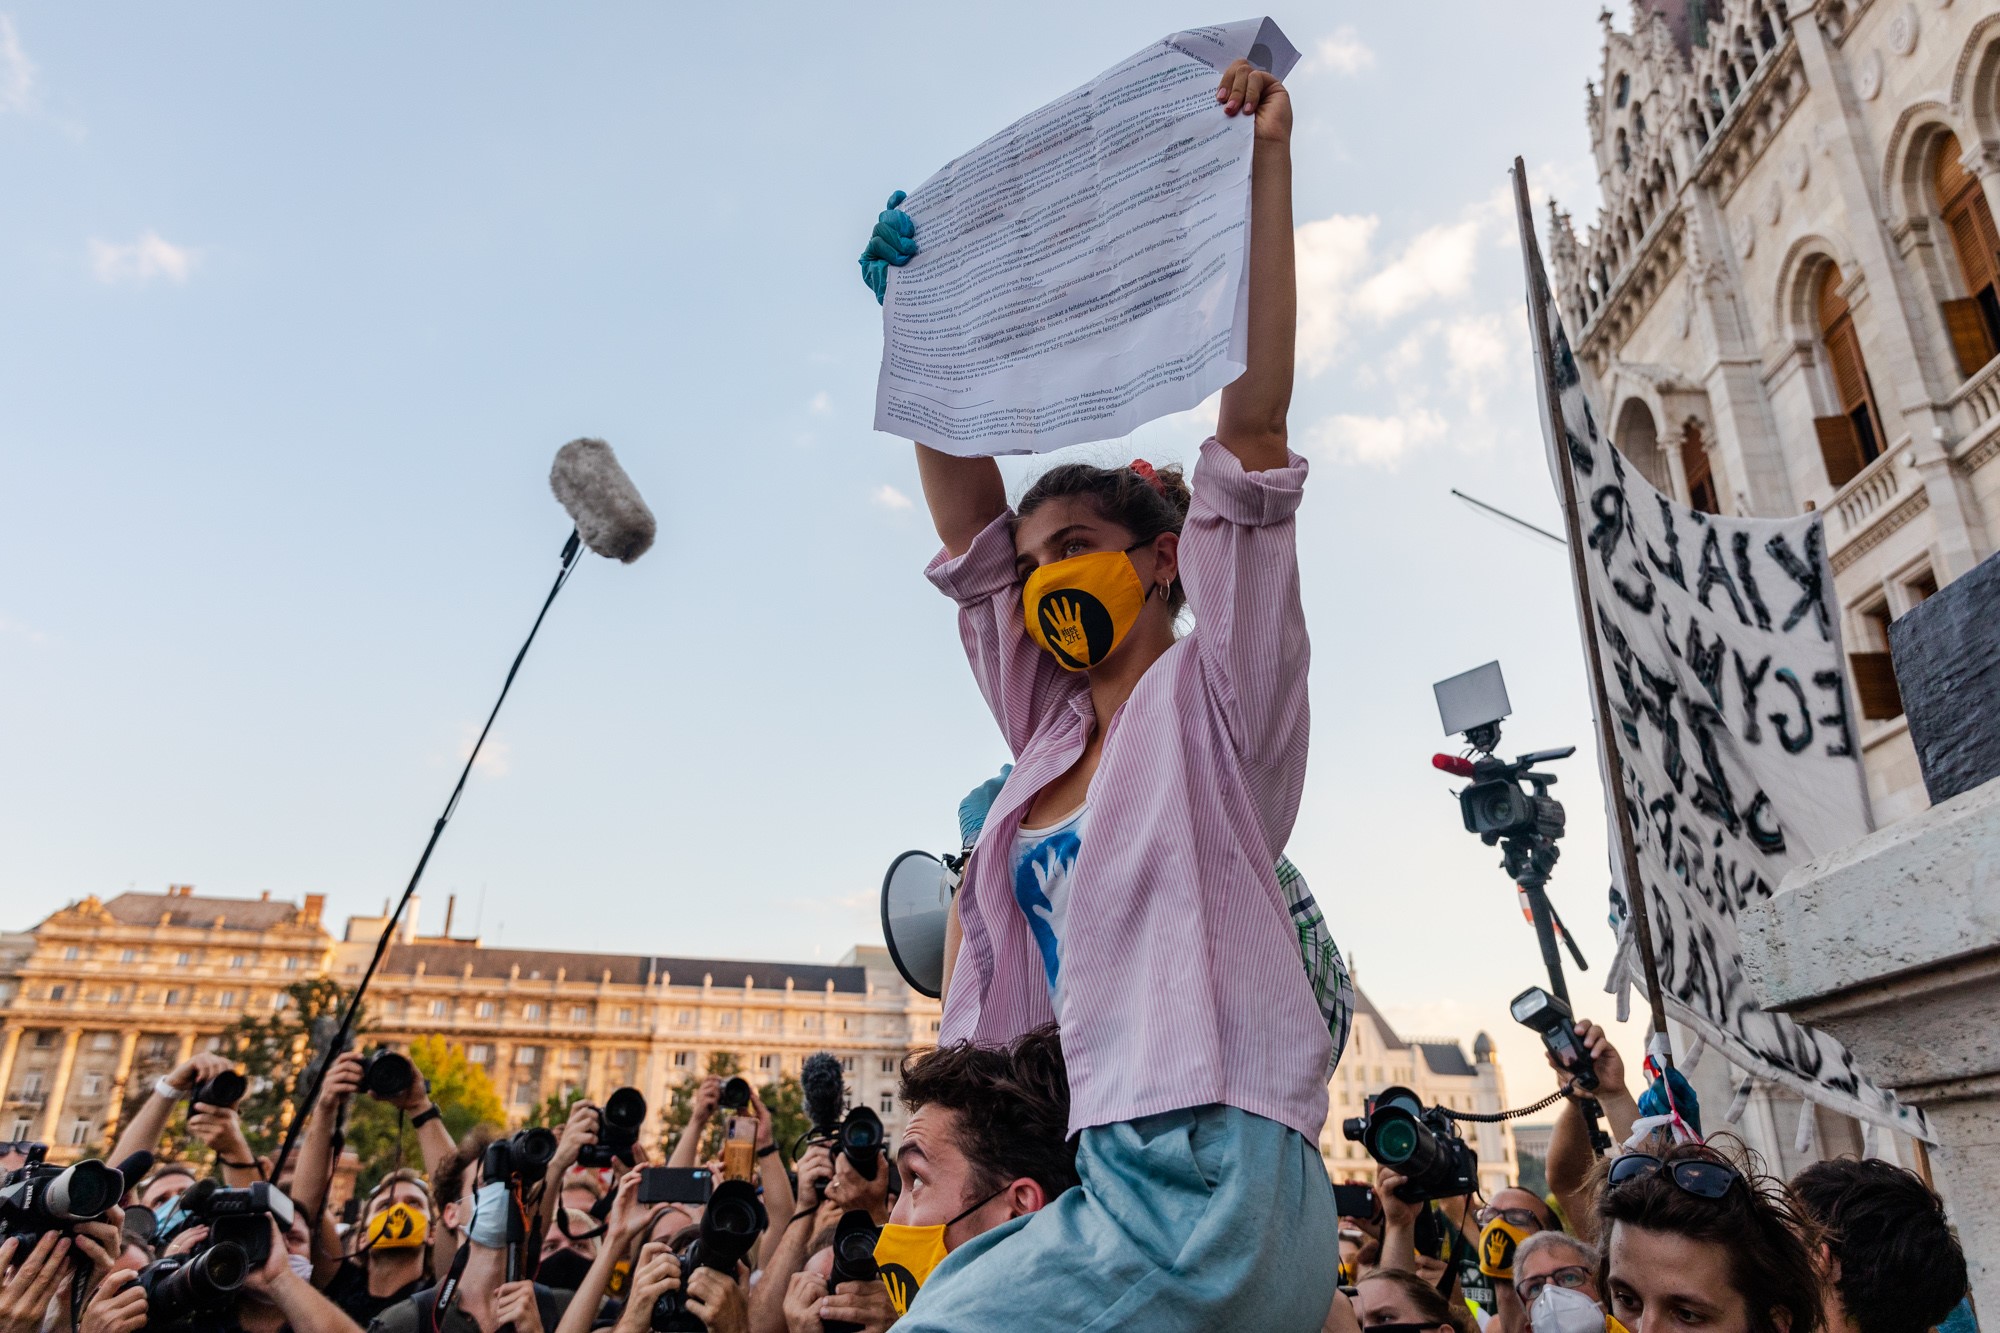 Budapest Man Jailed for Knifing Supporter of Student Protest Movement